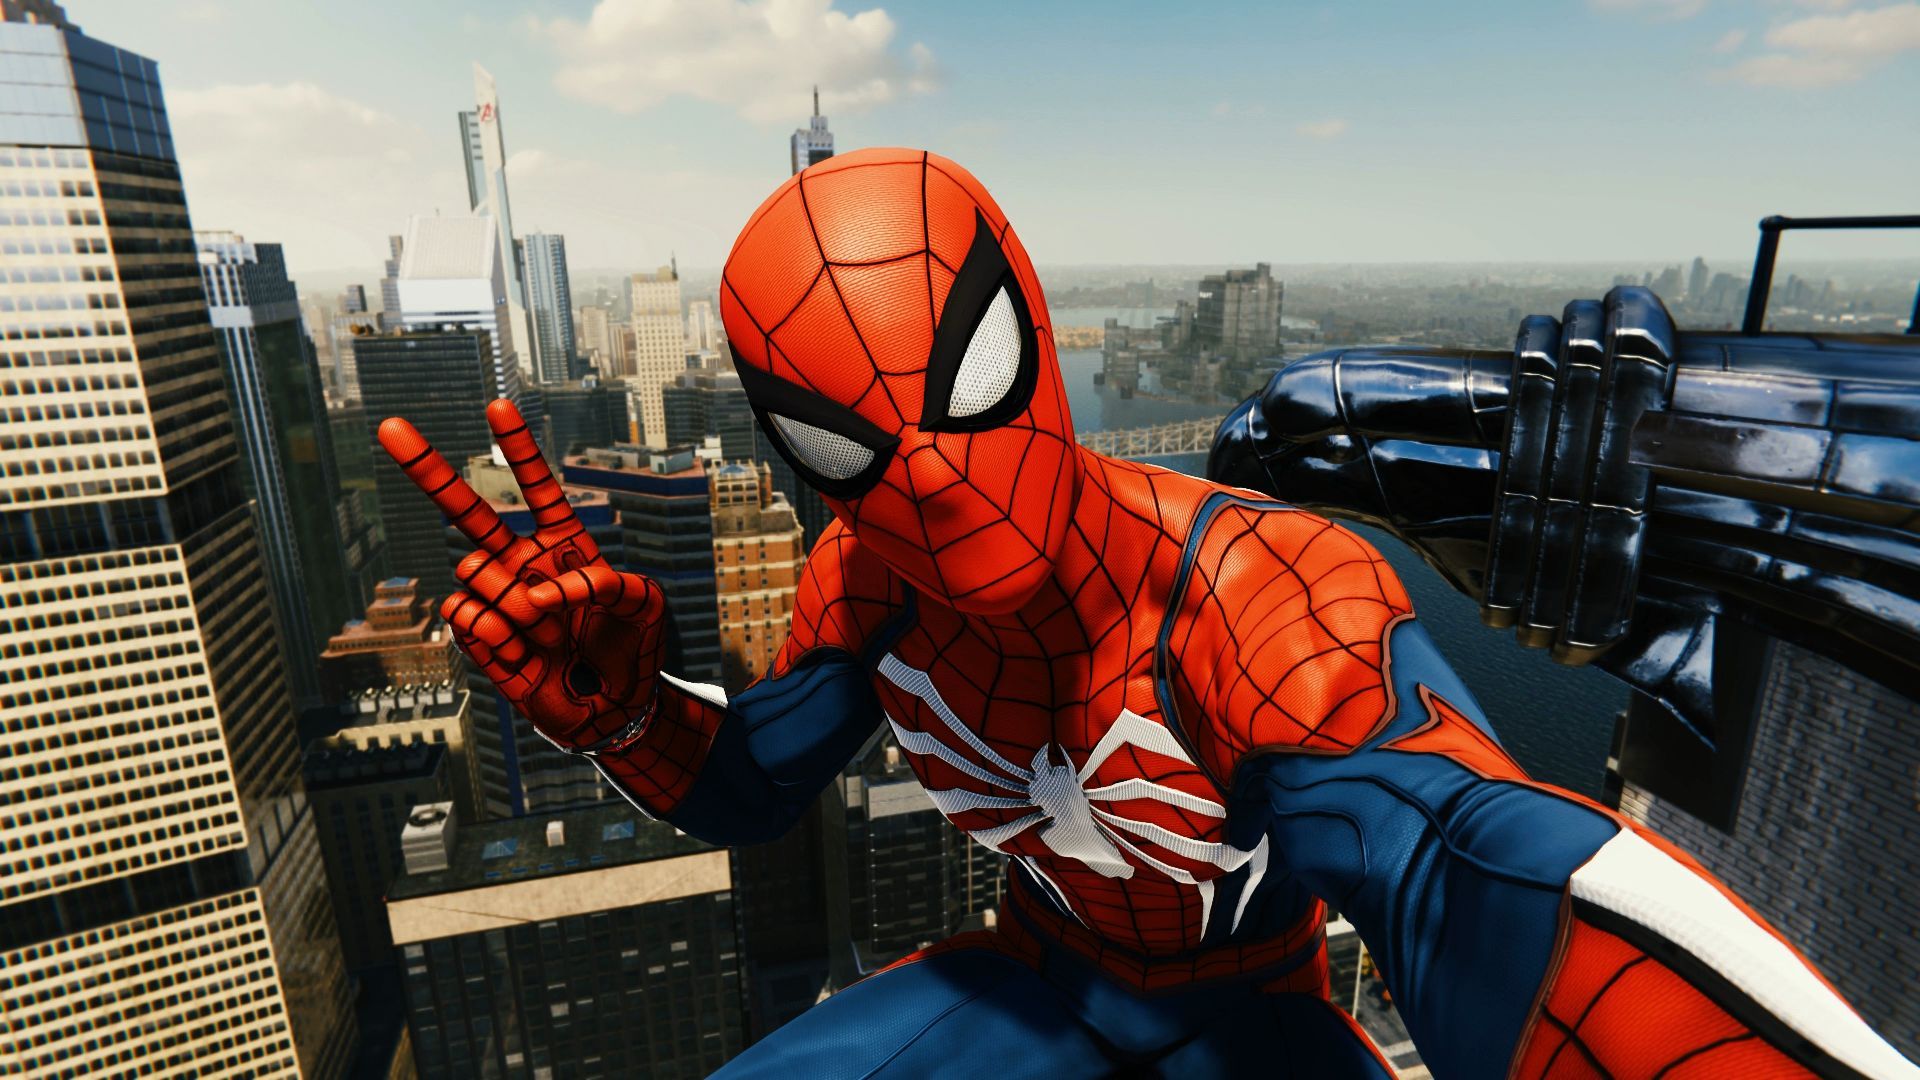 PS5 to Get a Remastered Version of Marvel's Spiderman